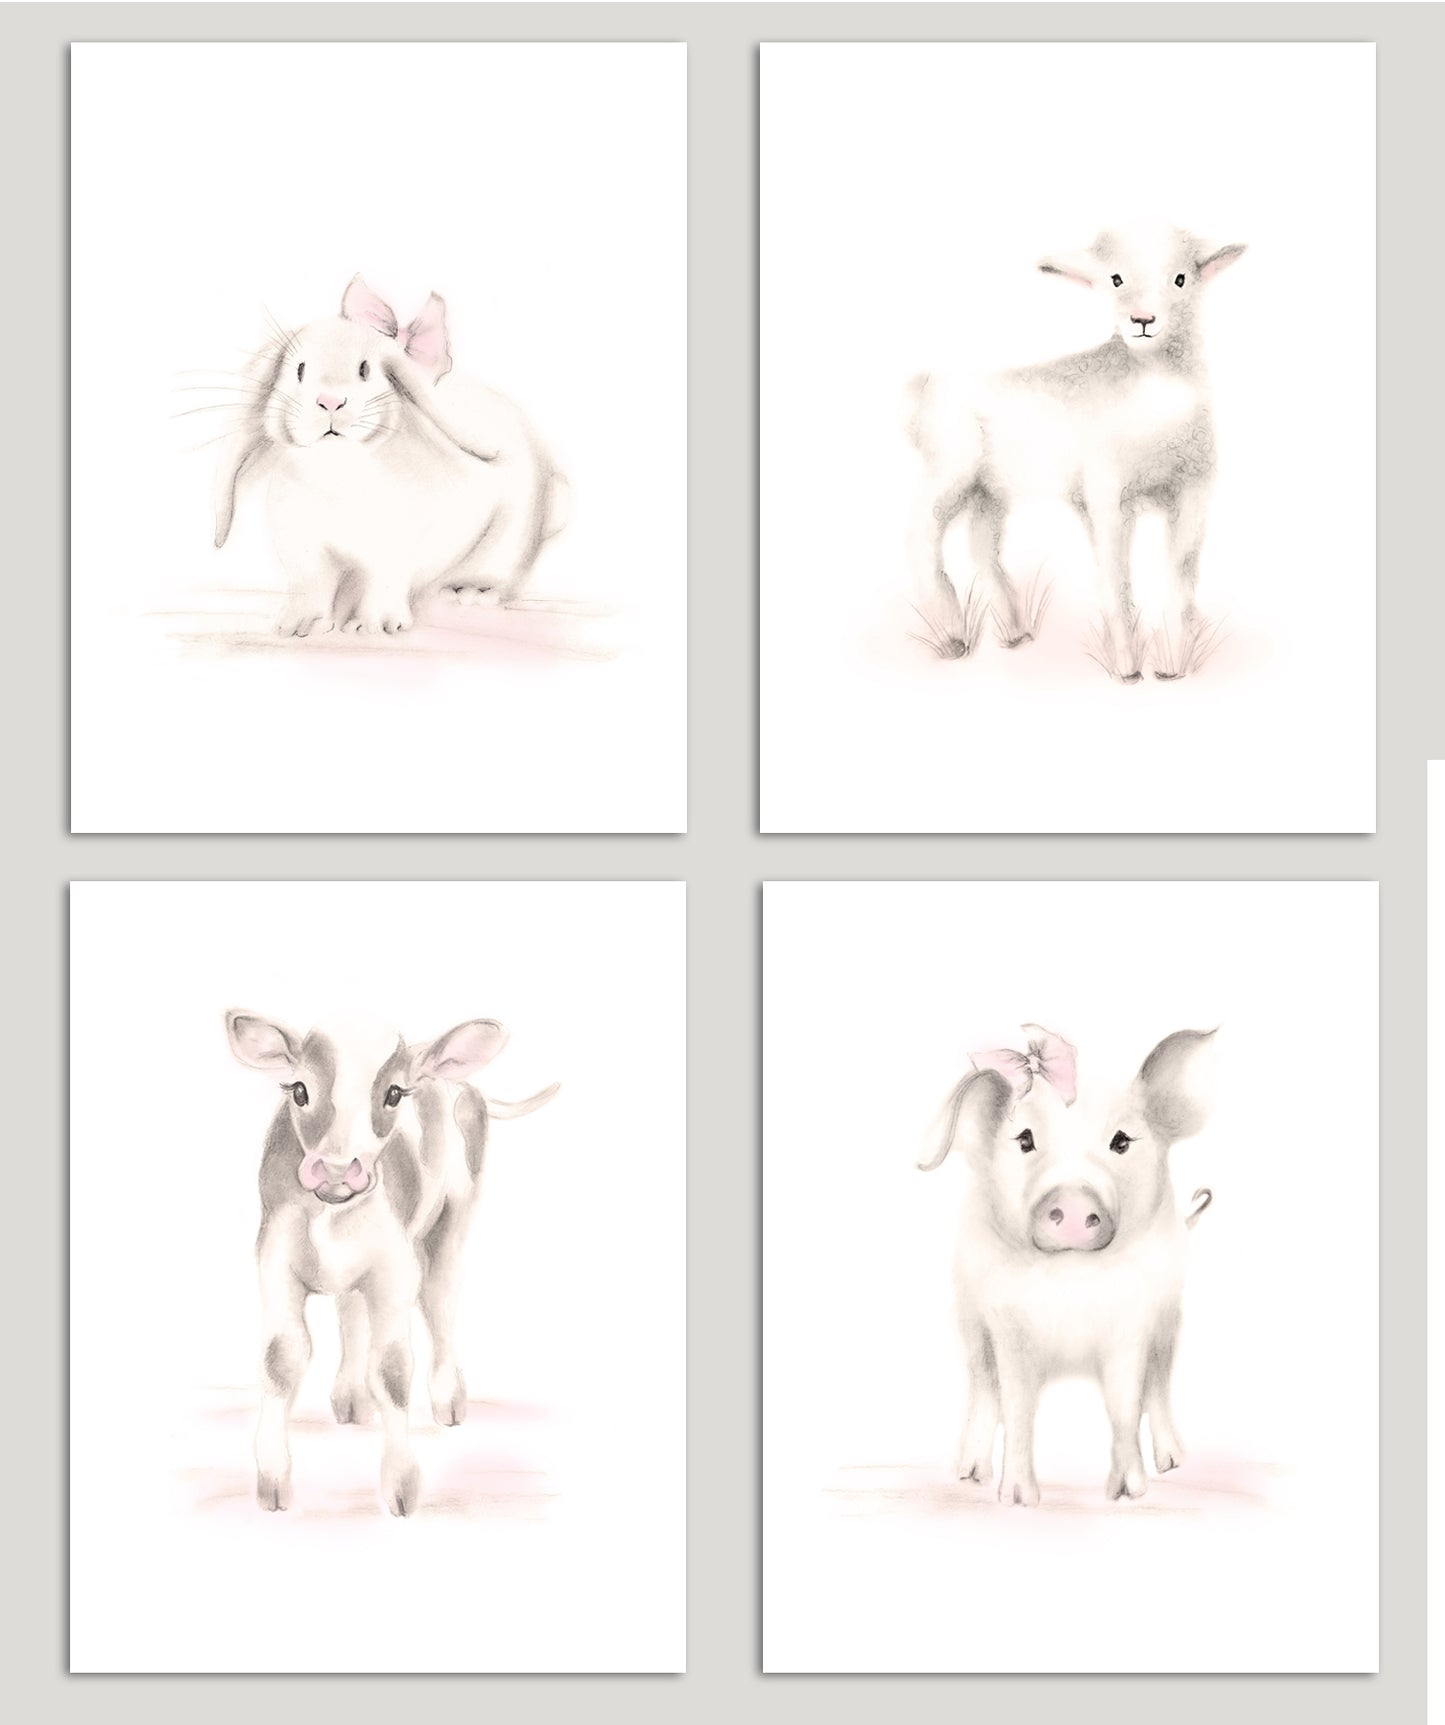 Set of 4 baby farm animal sketch prints in shades of beige and pink on white backgrounds placed against a light grey background.. Studio Q - Art by Nicky Quartermaine Scott